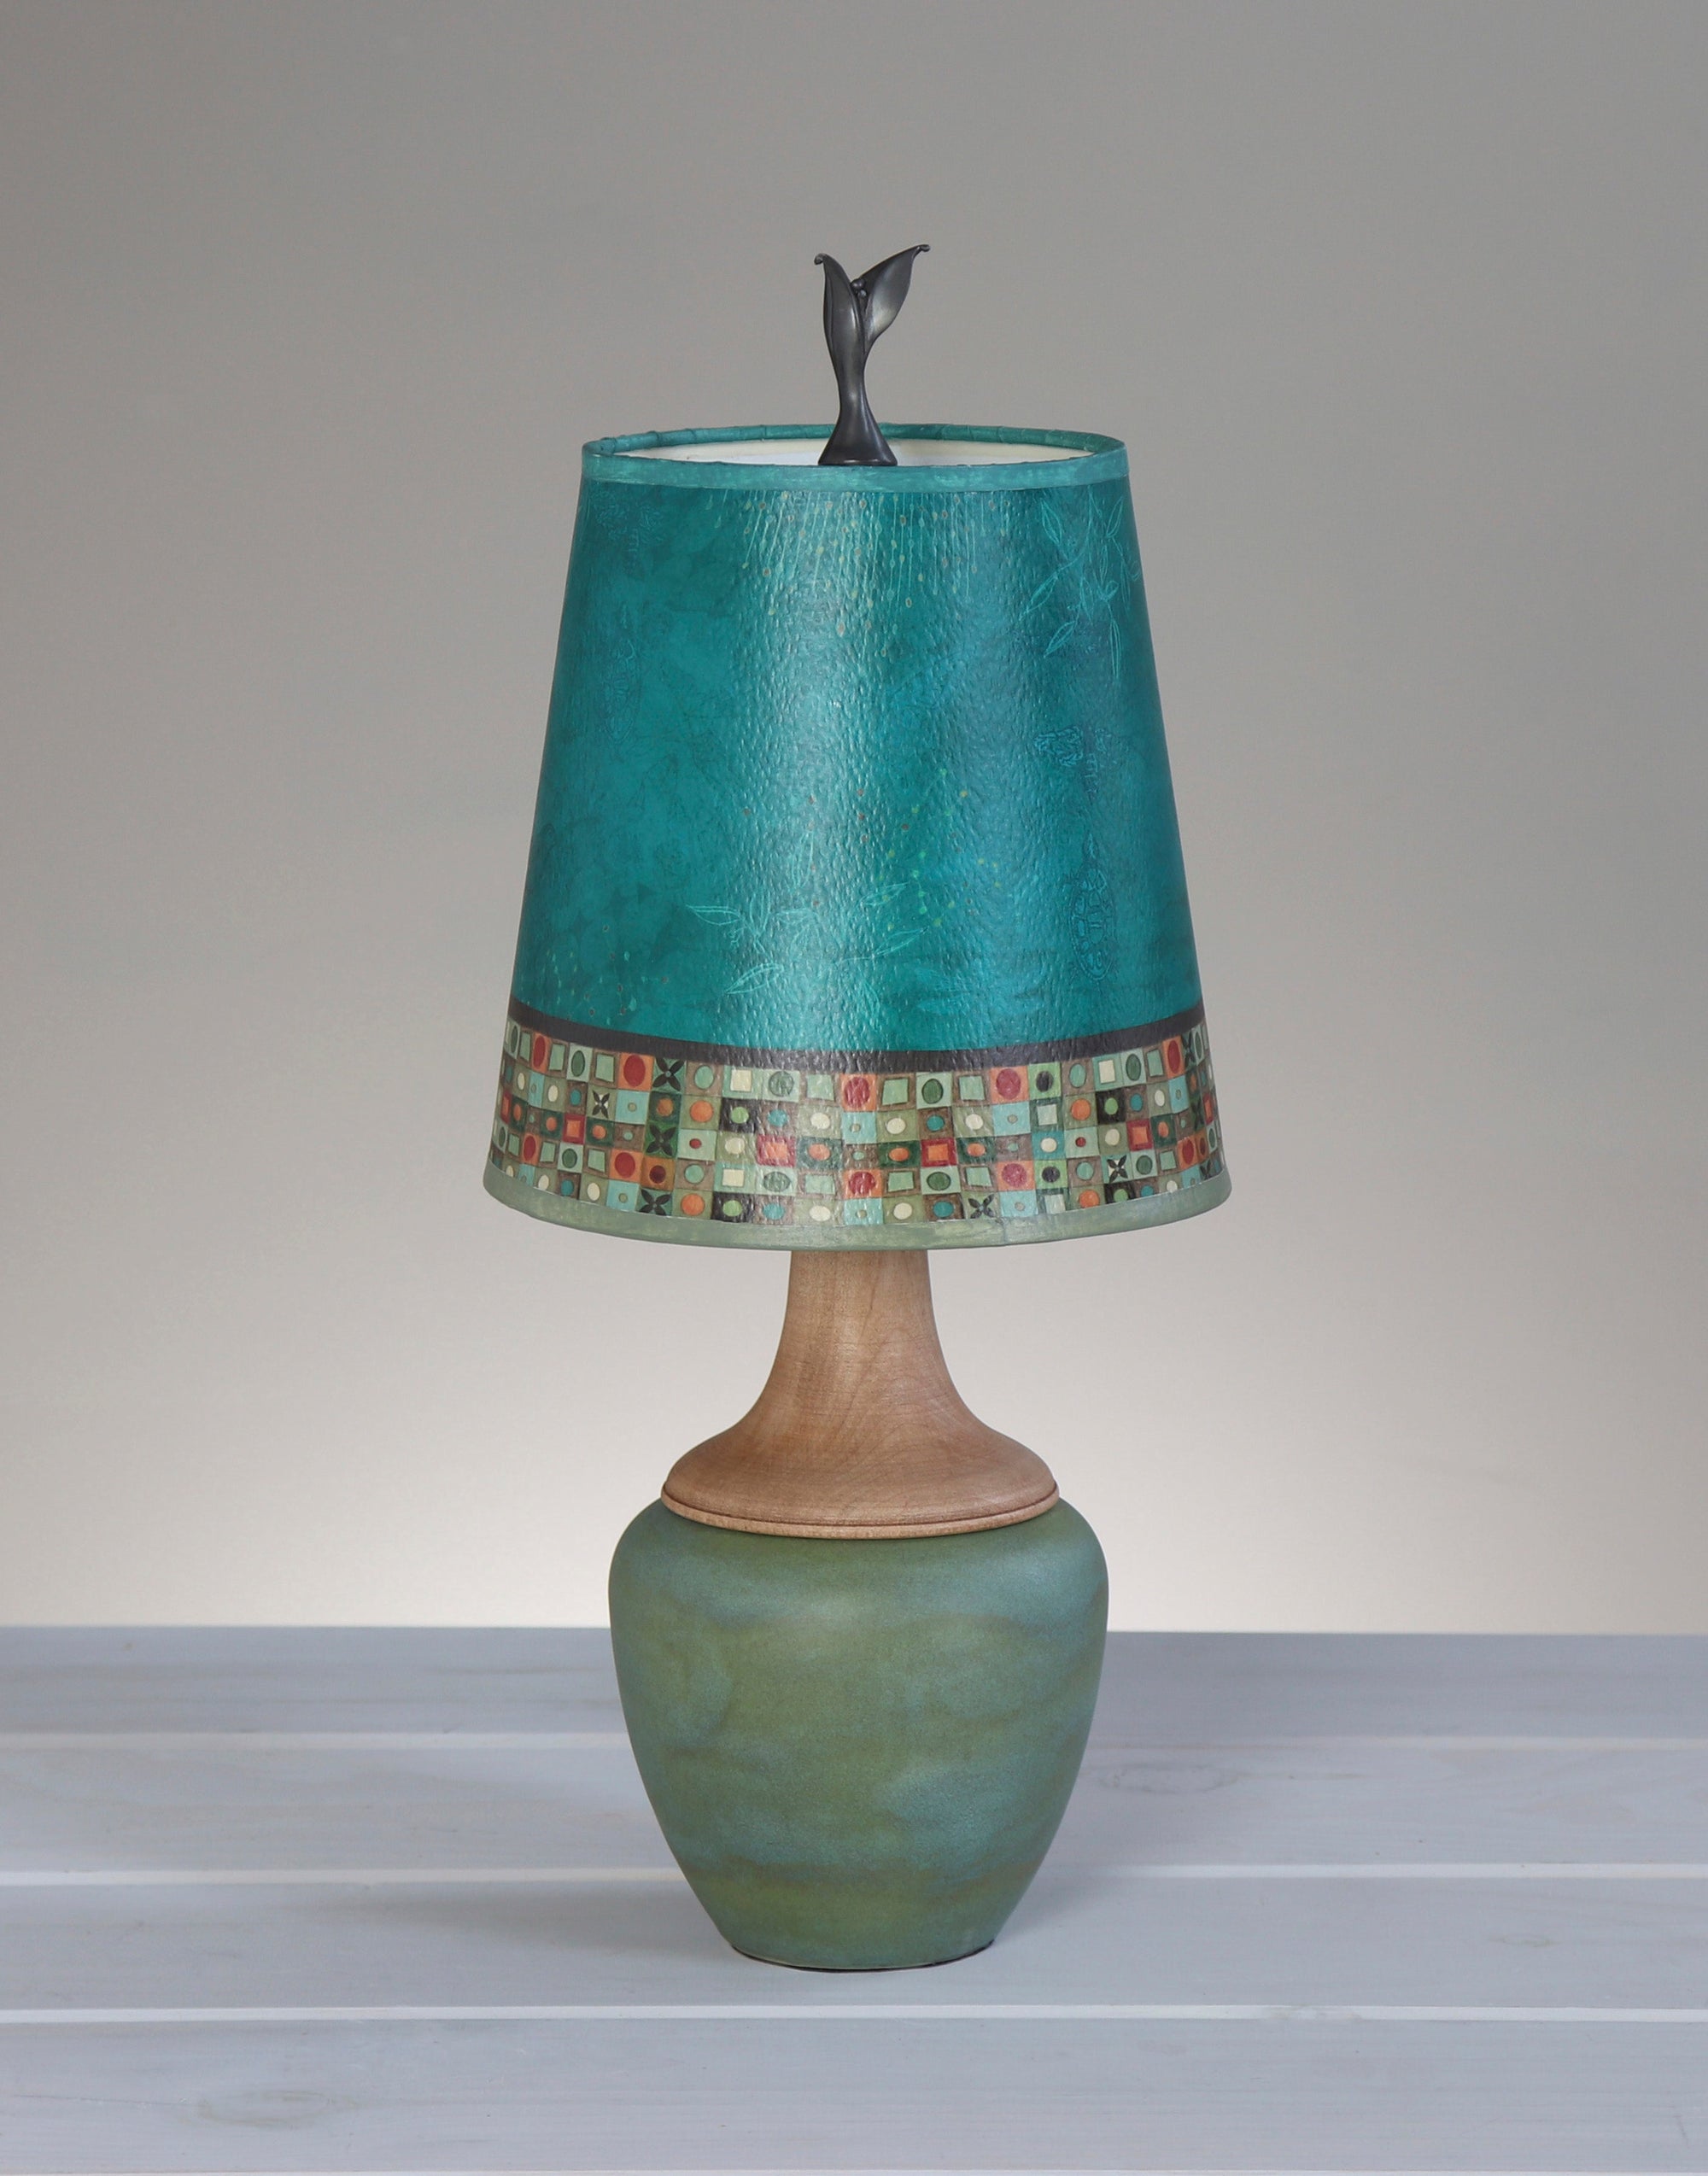 Janna Ugone & Co Table Lamps Ceramic and Maple Table Lamp with Small Drum Shade in Jade Mosaic